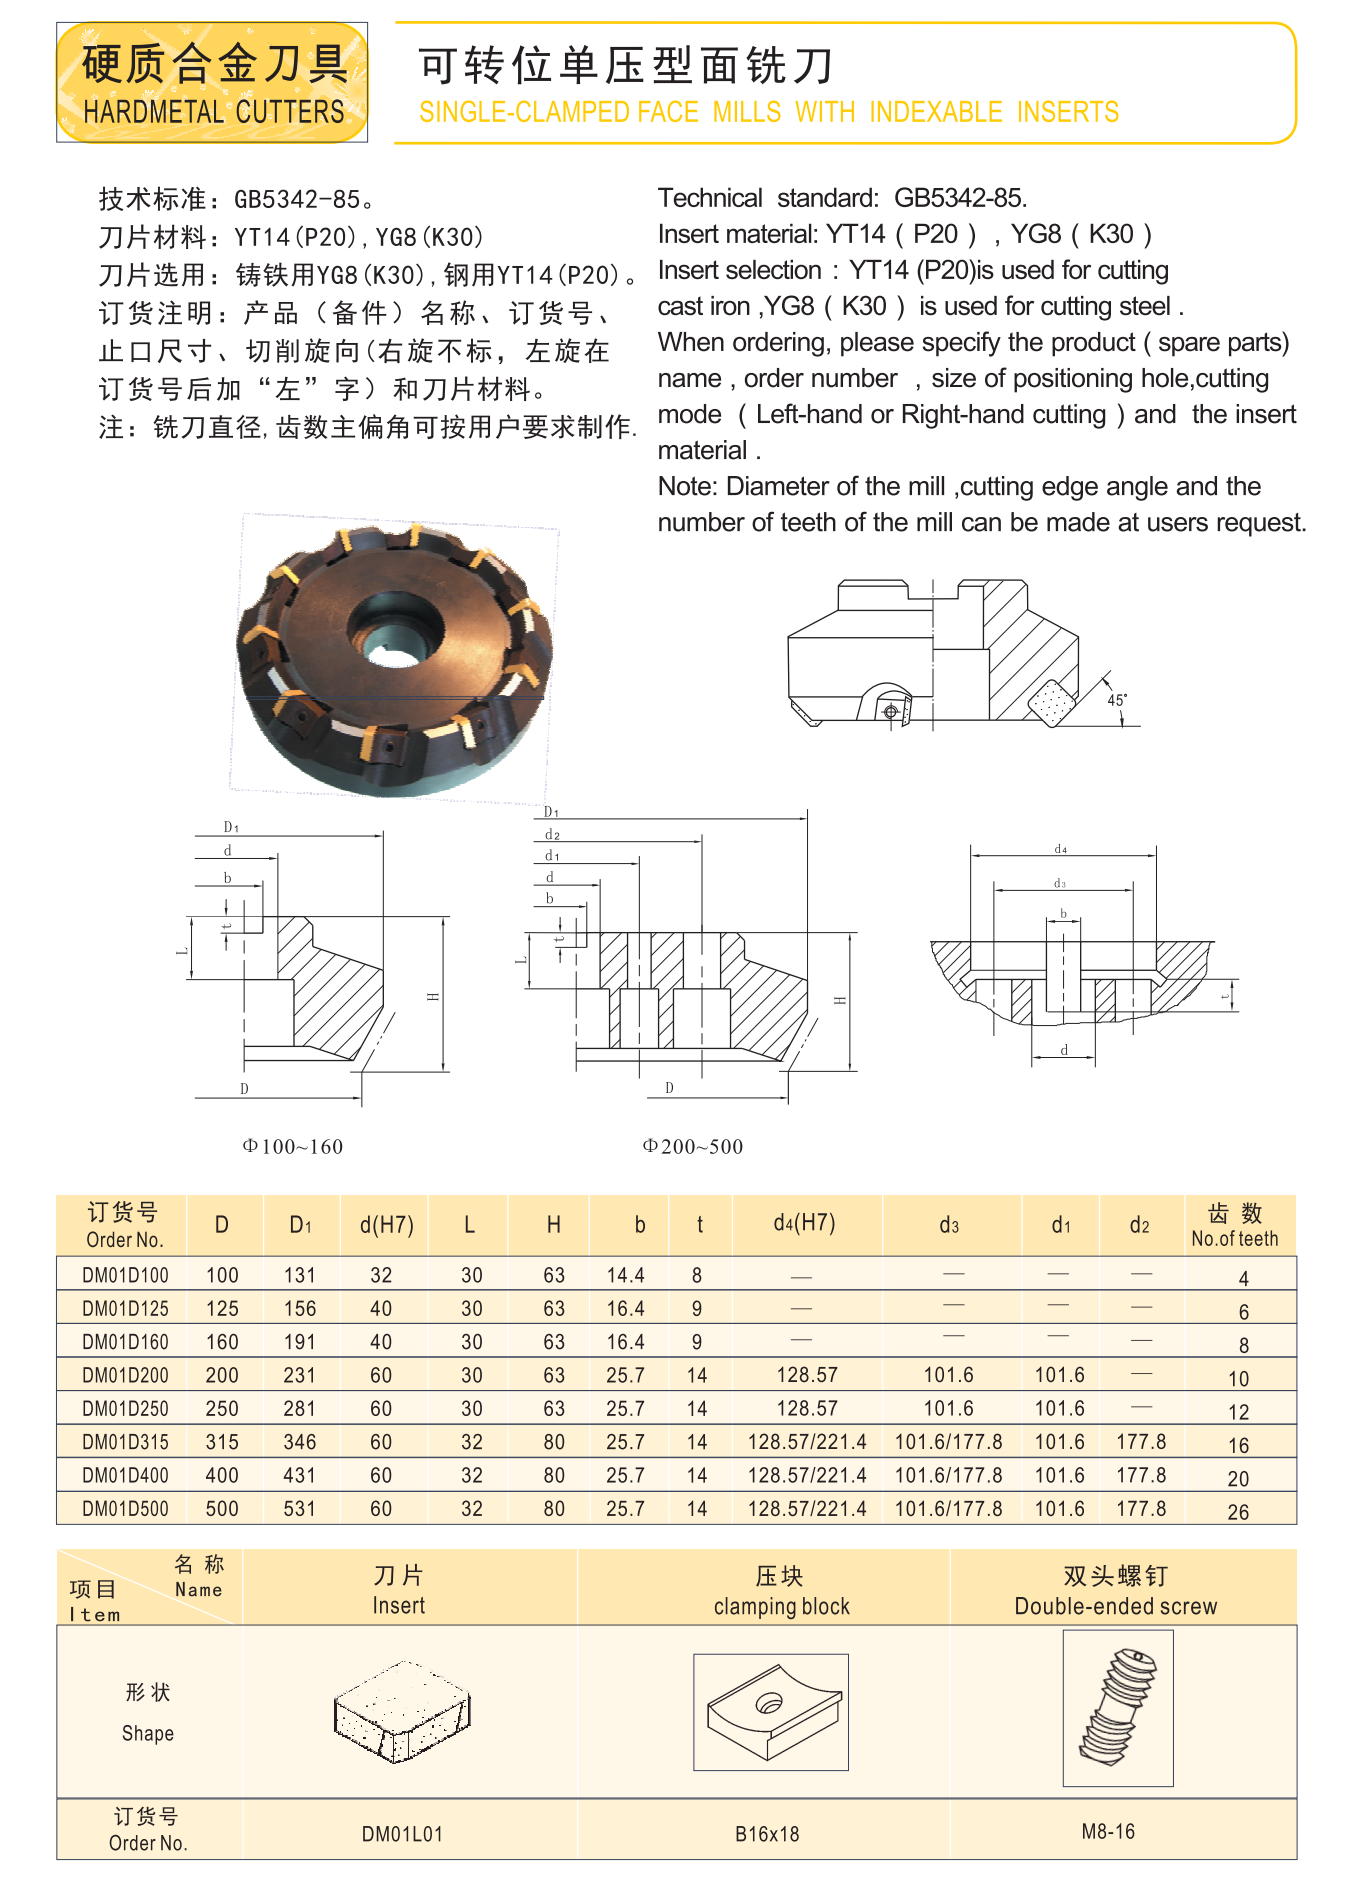 Indexable single pressure profile milling cutter